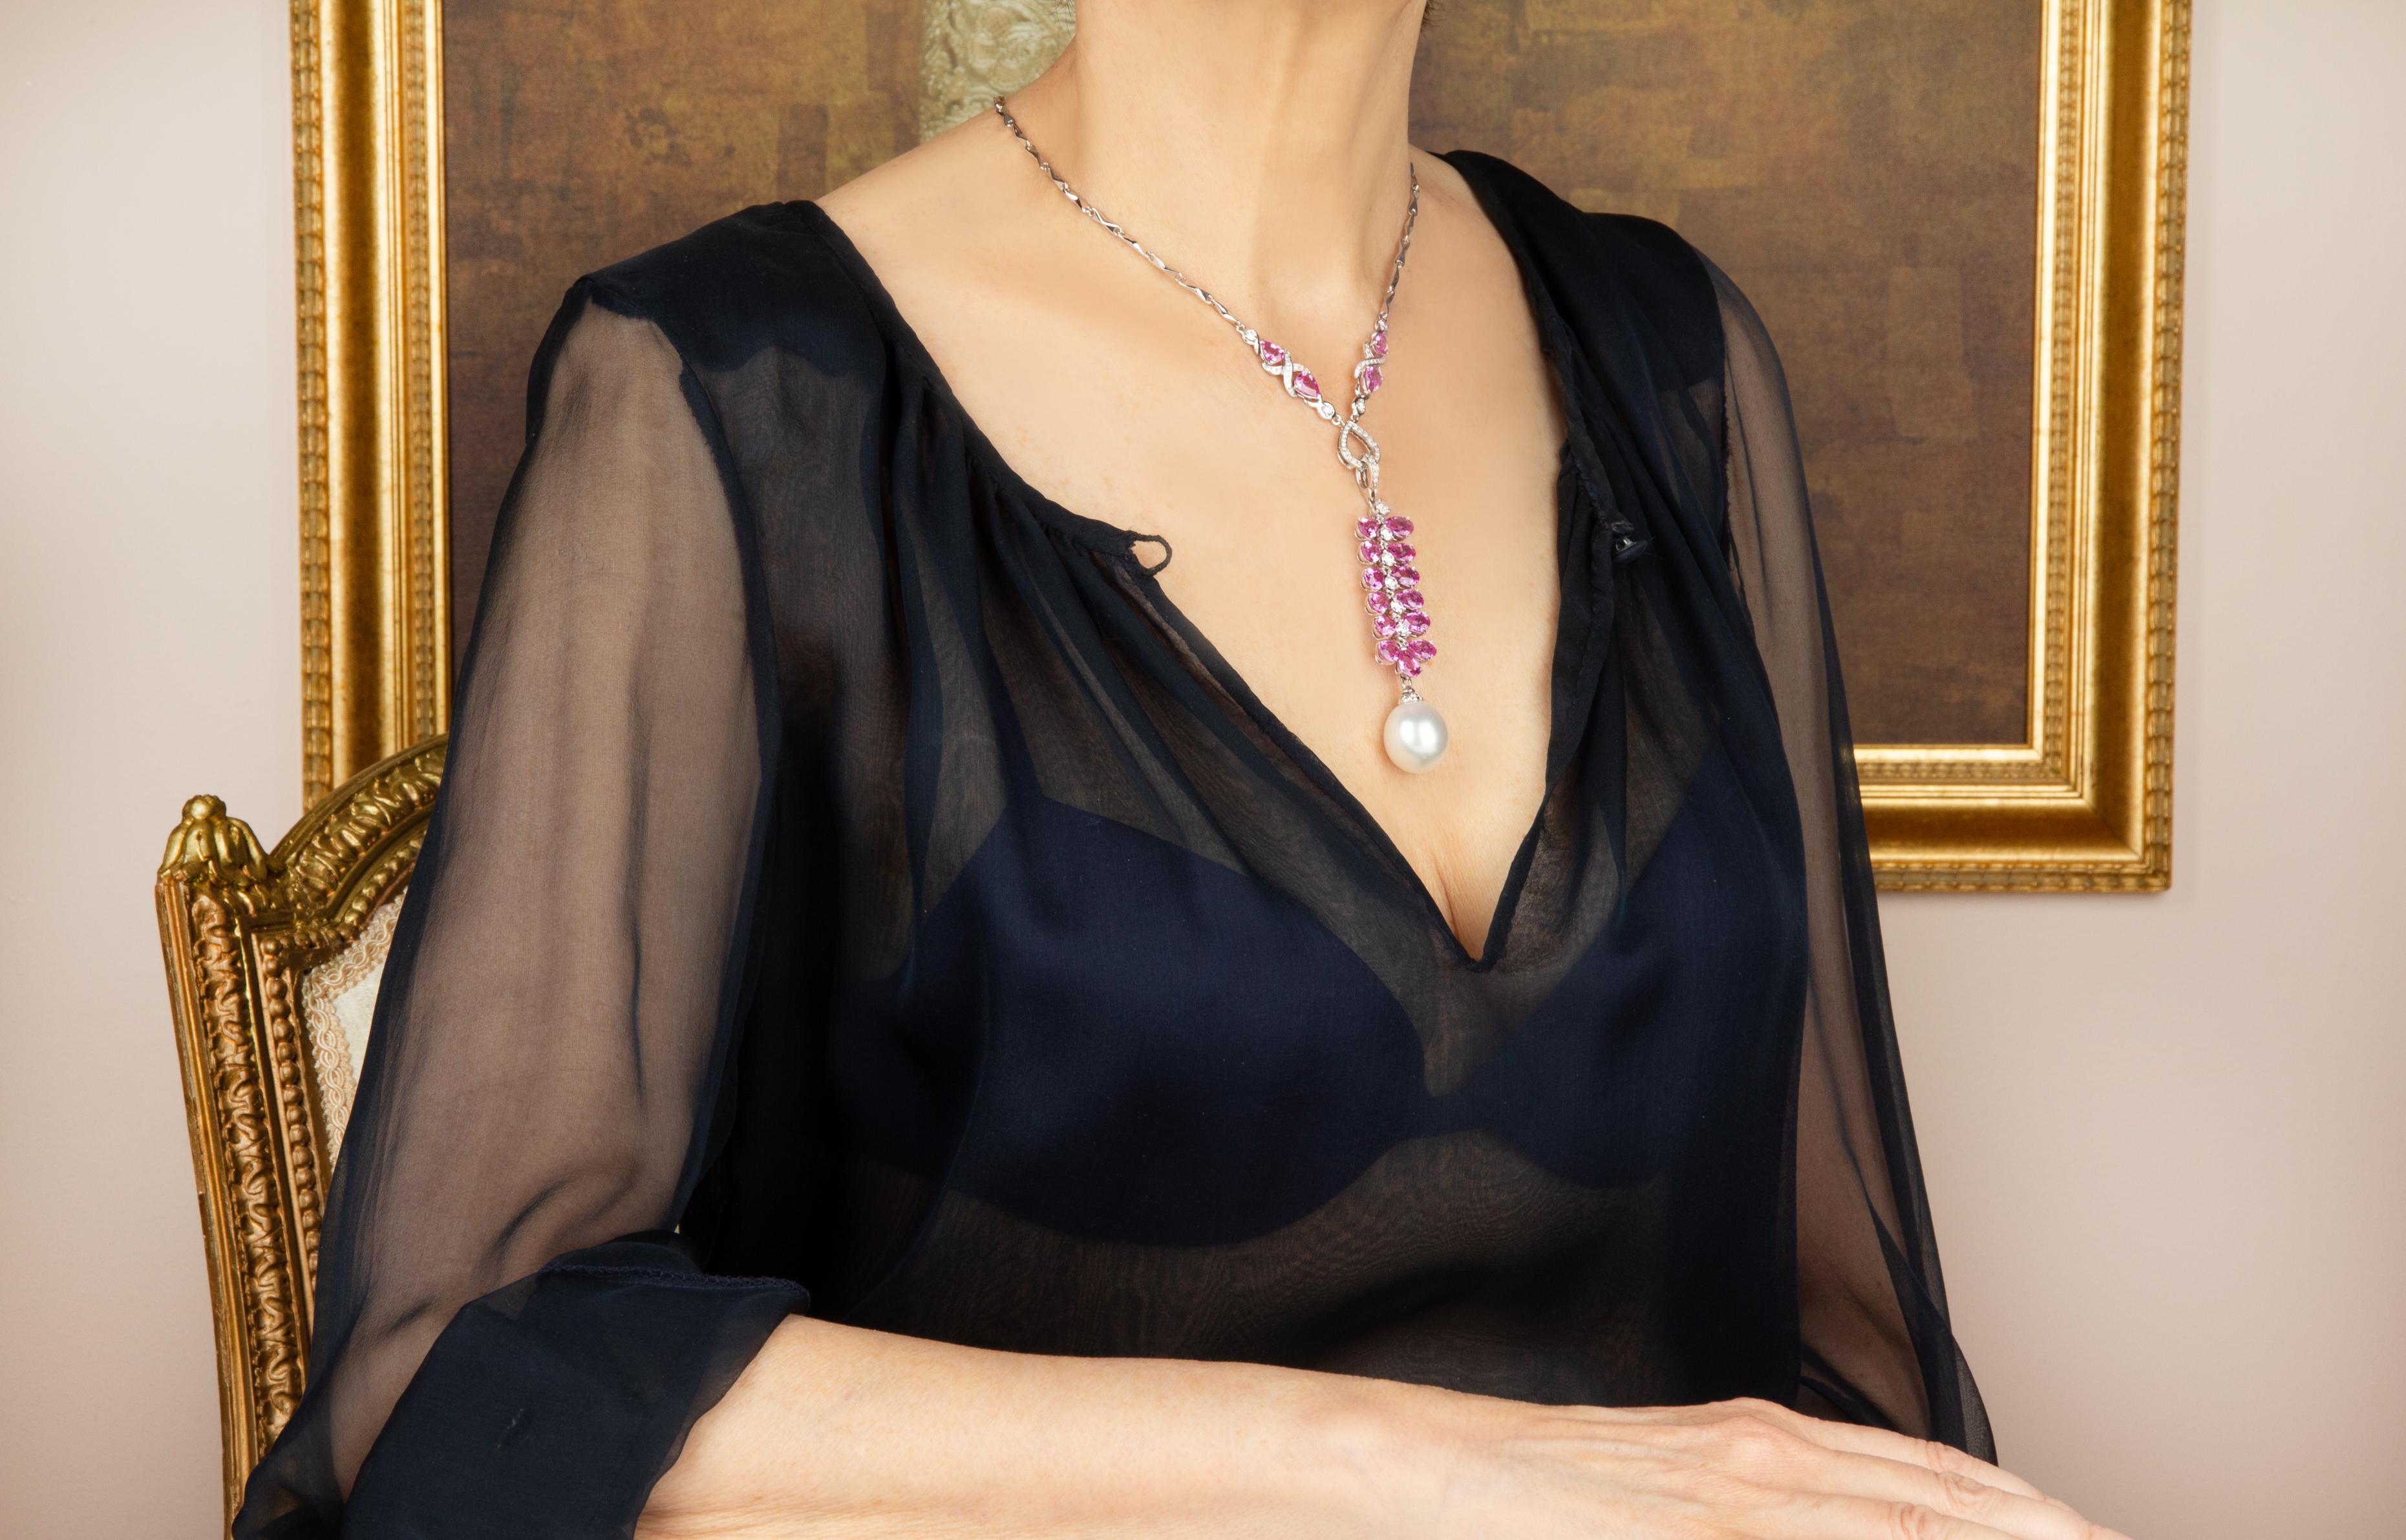 The pink sapphire pendant necklace features an articulated grapevine of drop shape faceted gems flanking a spine of round diamonds. The jewel suspends a splendid South Sea pearl of a very rare size: 19 x 17mm. The 3.25” pendant is accompanied by a